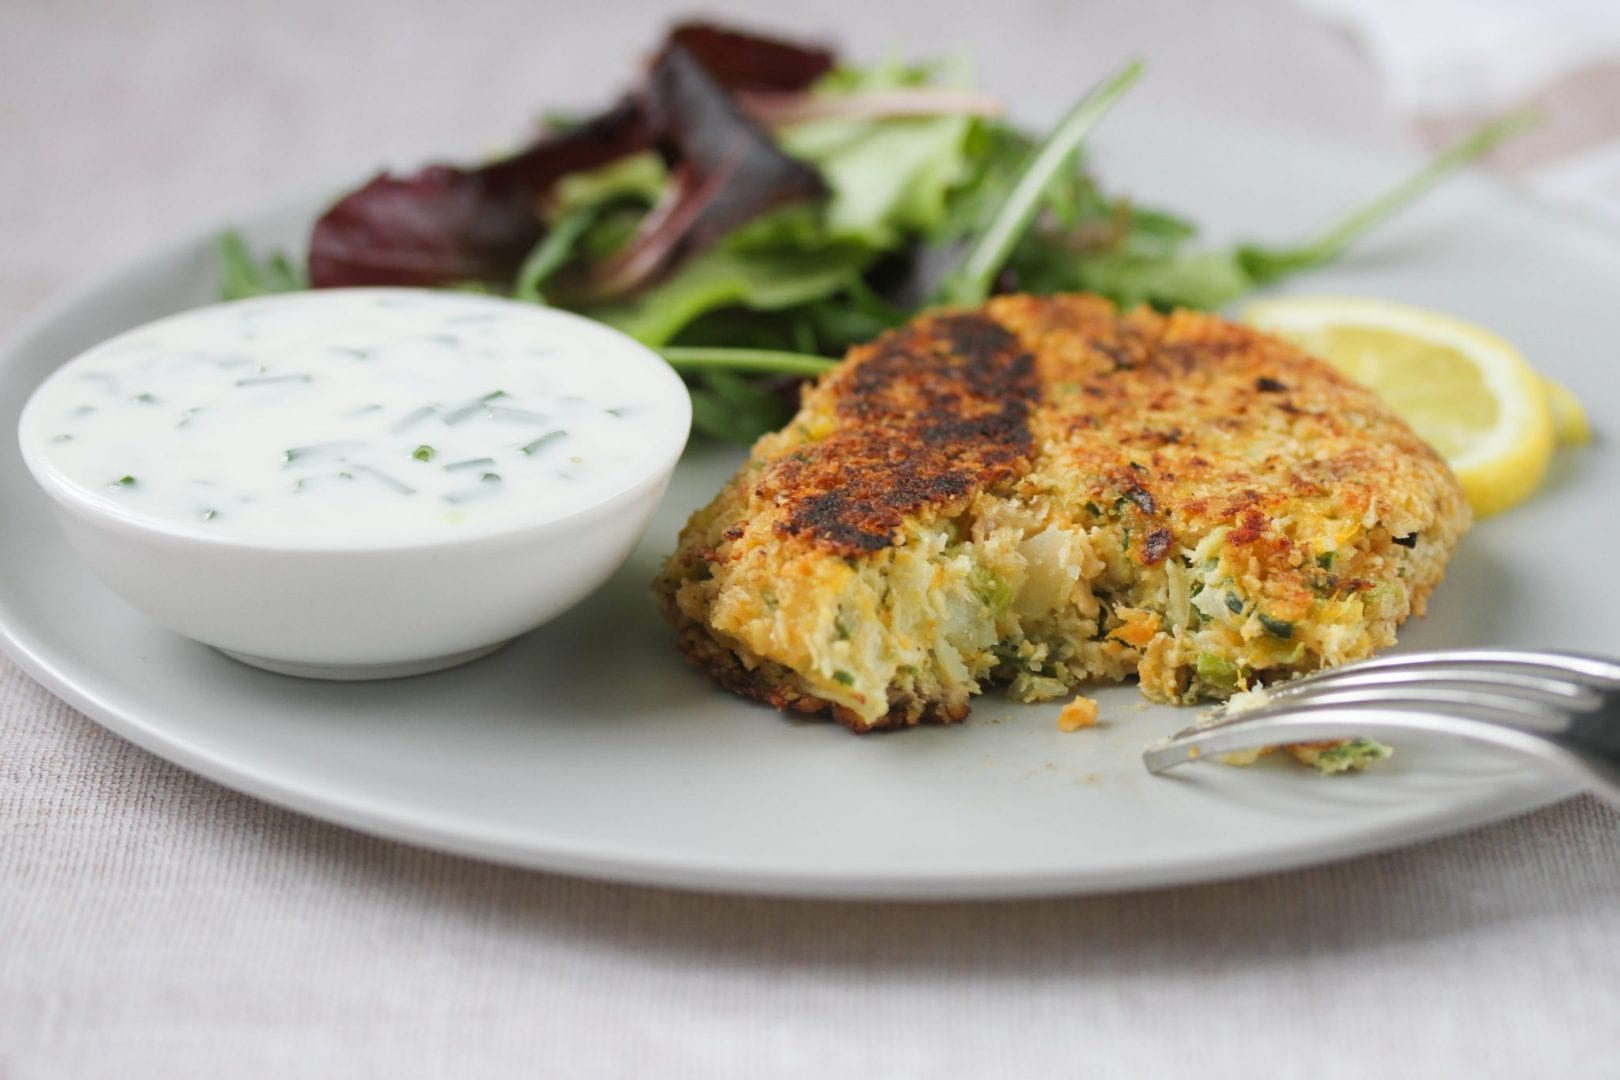 Salmon fish cakes - try these healthy fish cakes for kids